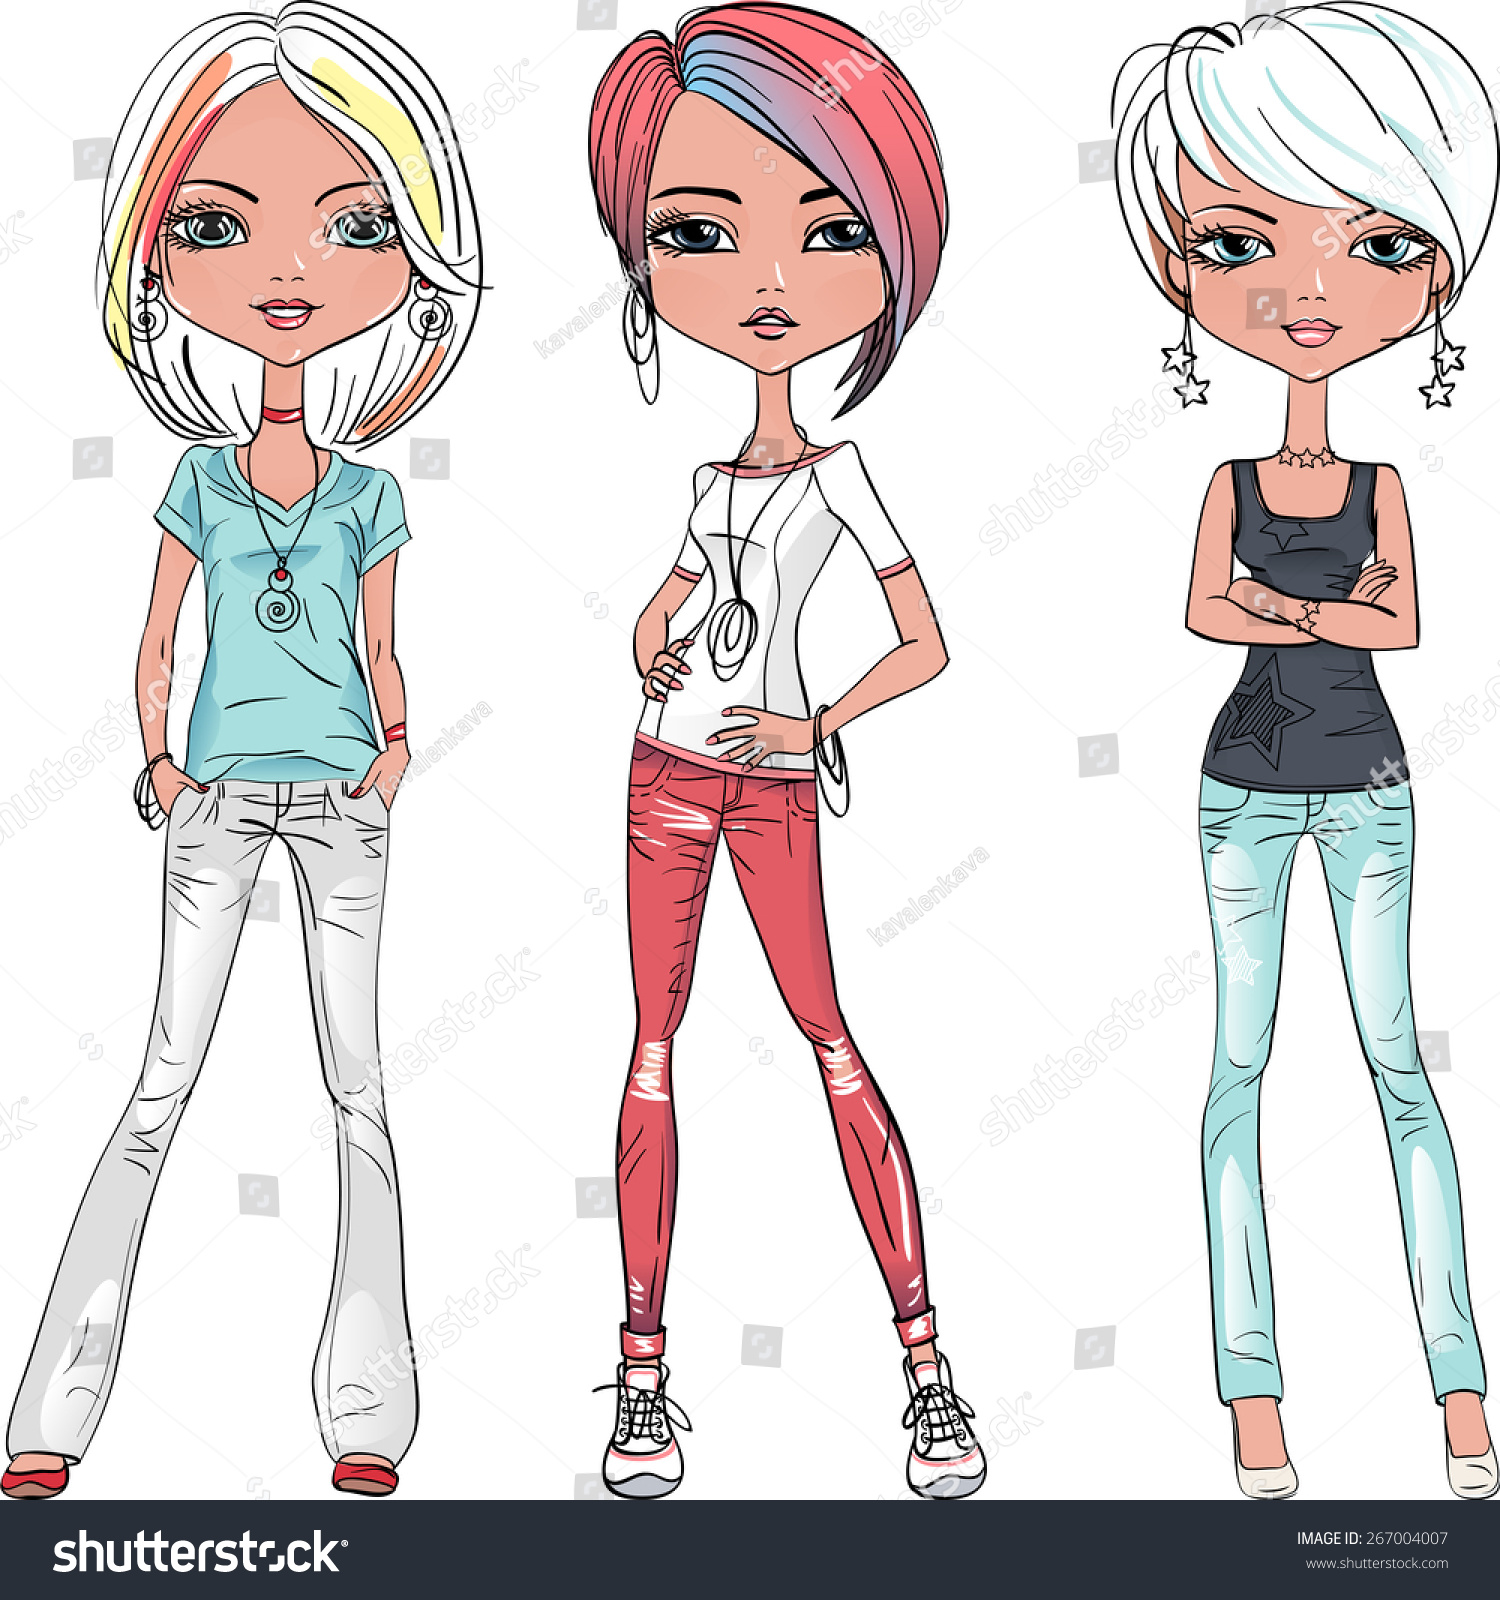 Start Blog About Teen Fashions 86